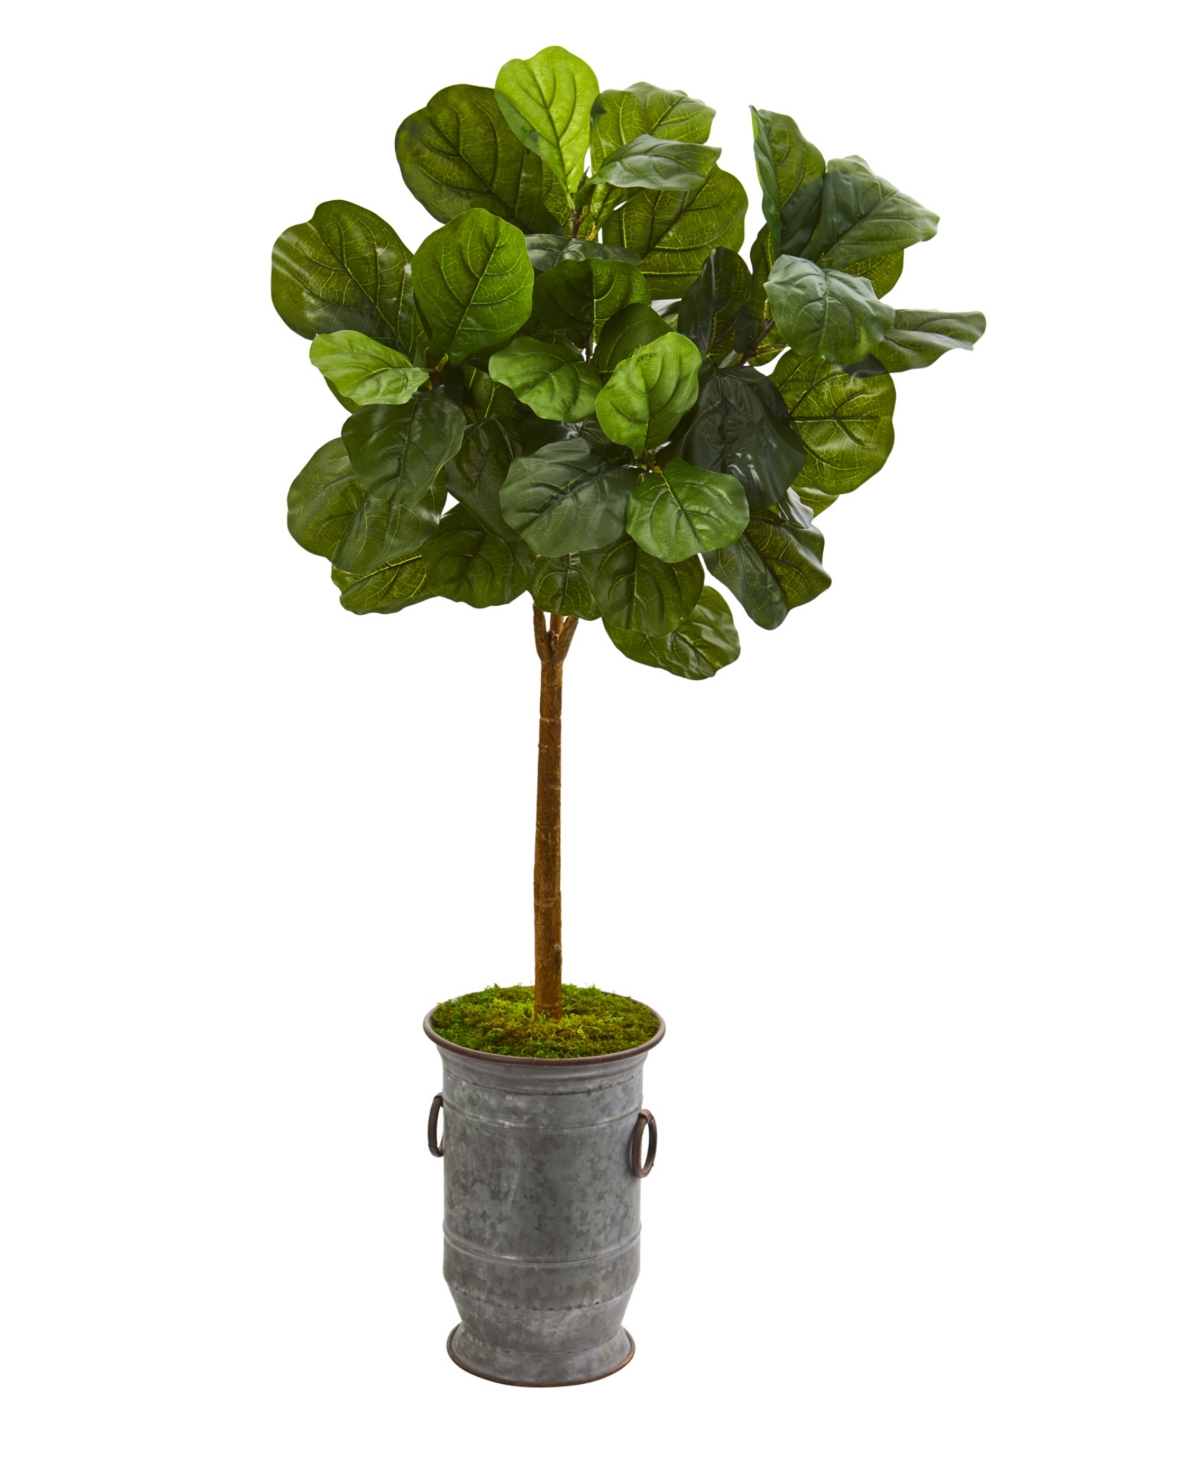 46in. Fiddle Leaf Artificial Tree in Vintage Metal Planter Real Touch - Green